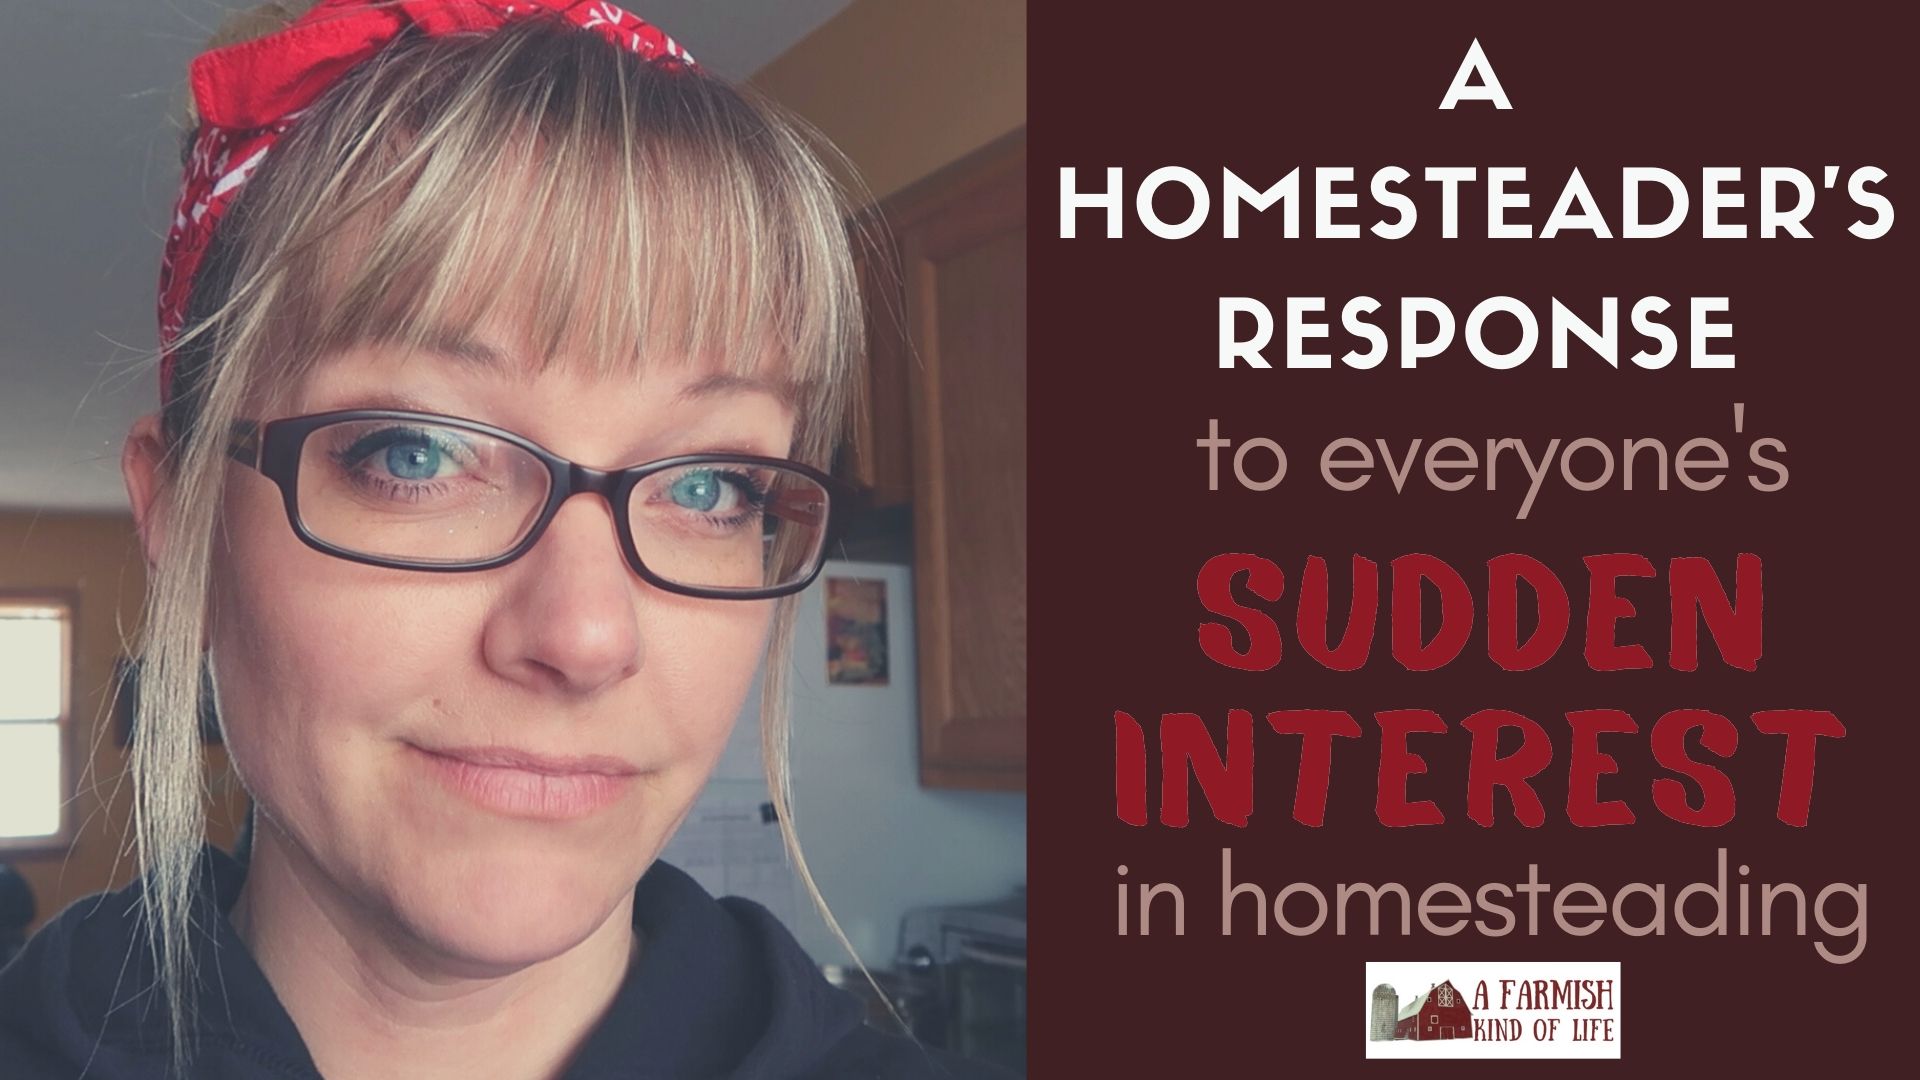 87: A Homesteader’s Response to Everyone’s Sudden Interest in Homesteading